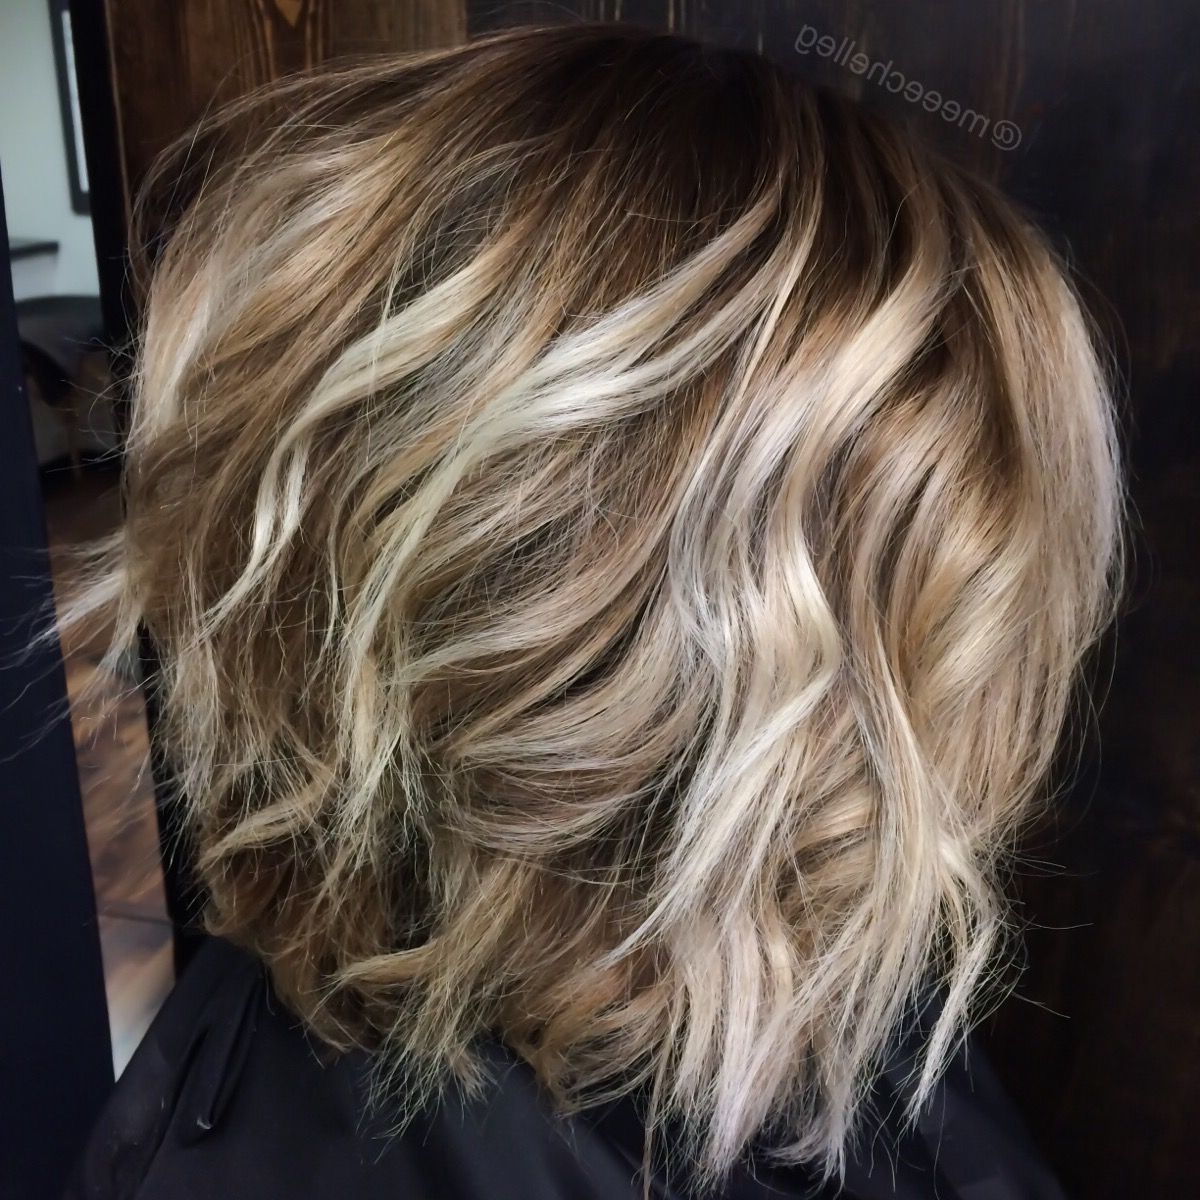 Brassy Hair Painting In The Matter Of Bob Blonde Highlights Intended For 2017 Long Bob Blonde Hairstyles With Lowlights (View 17 of 20)